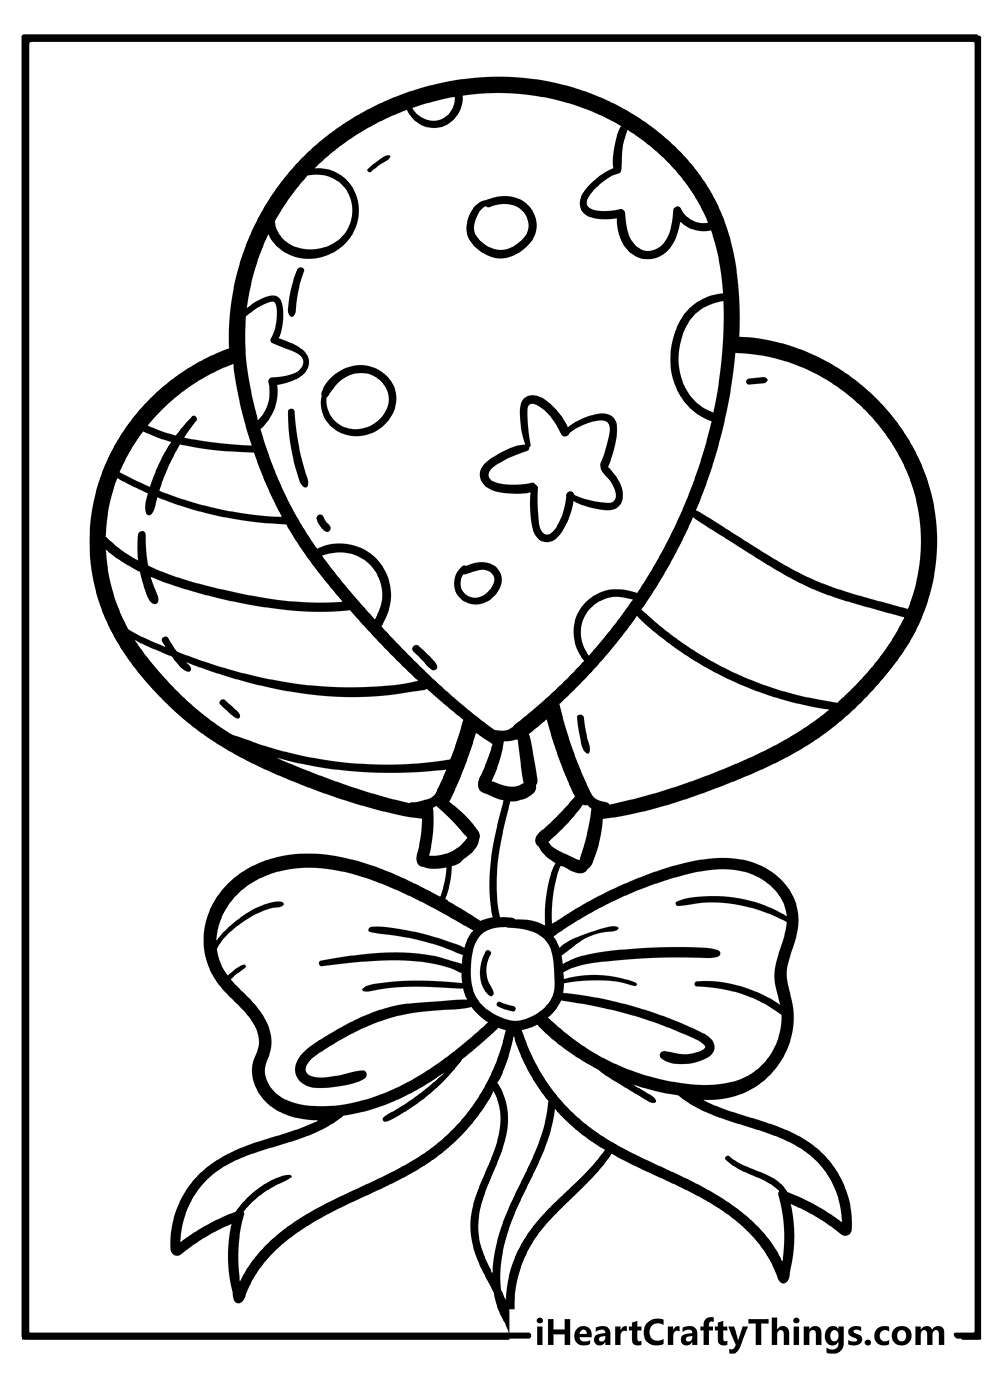 Printable Balloons Coloring Pages Updated 20